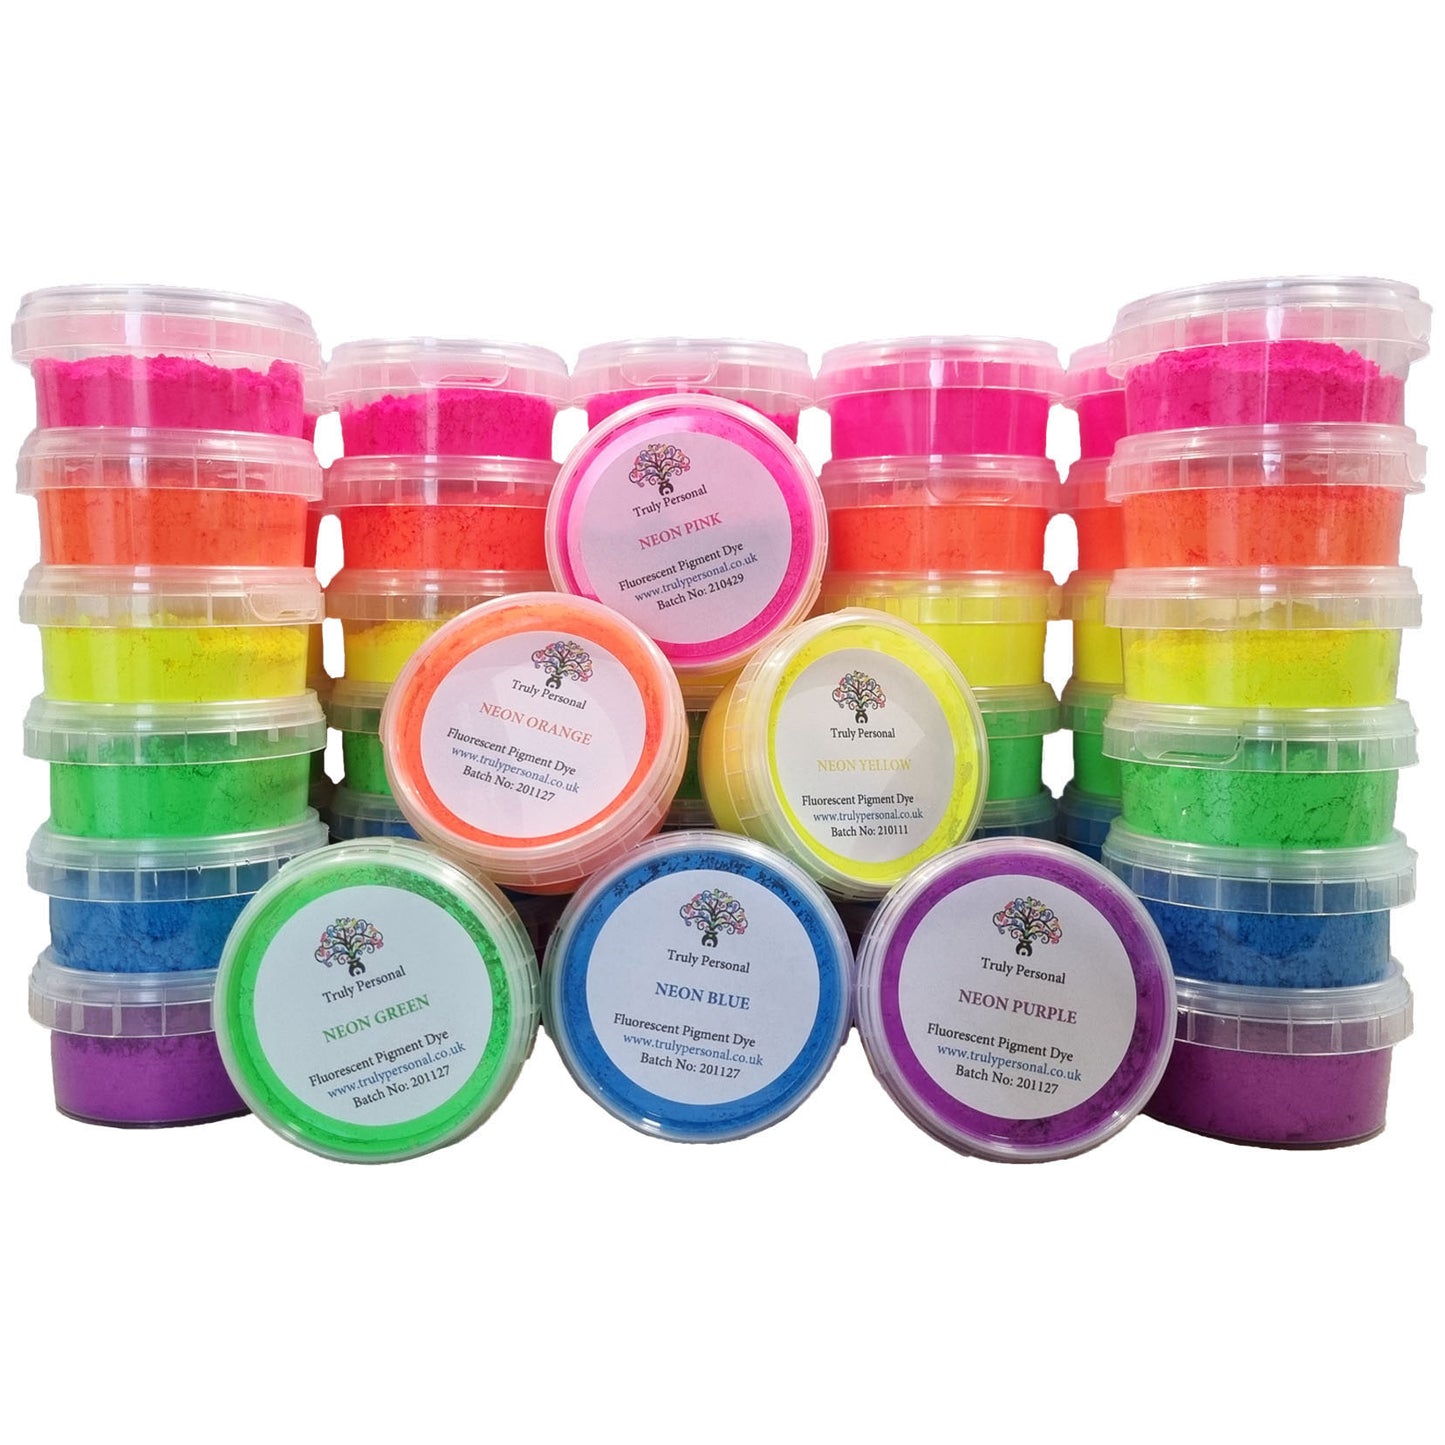 Neon Rose | Fluorescent Pigment Dye | Candles, Wax Melt, Cosmetics, Bath Bombs, Shower Gel | Truly Personal